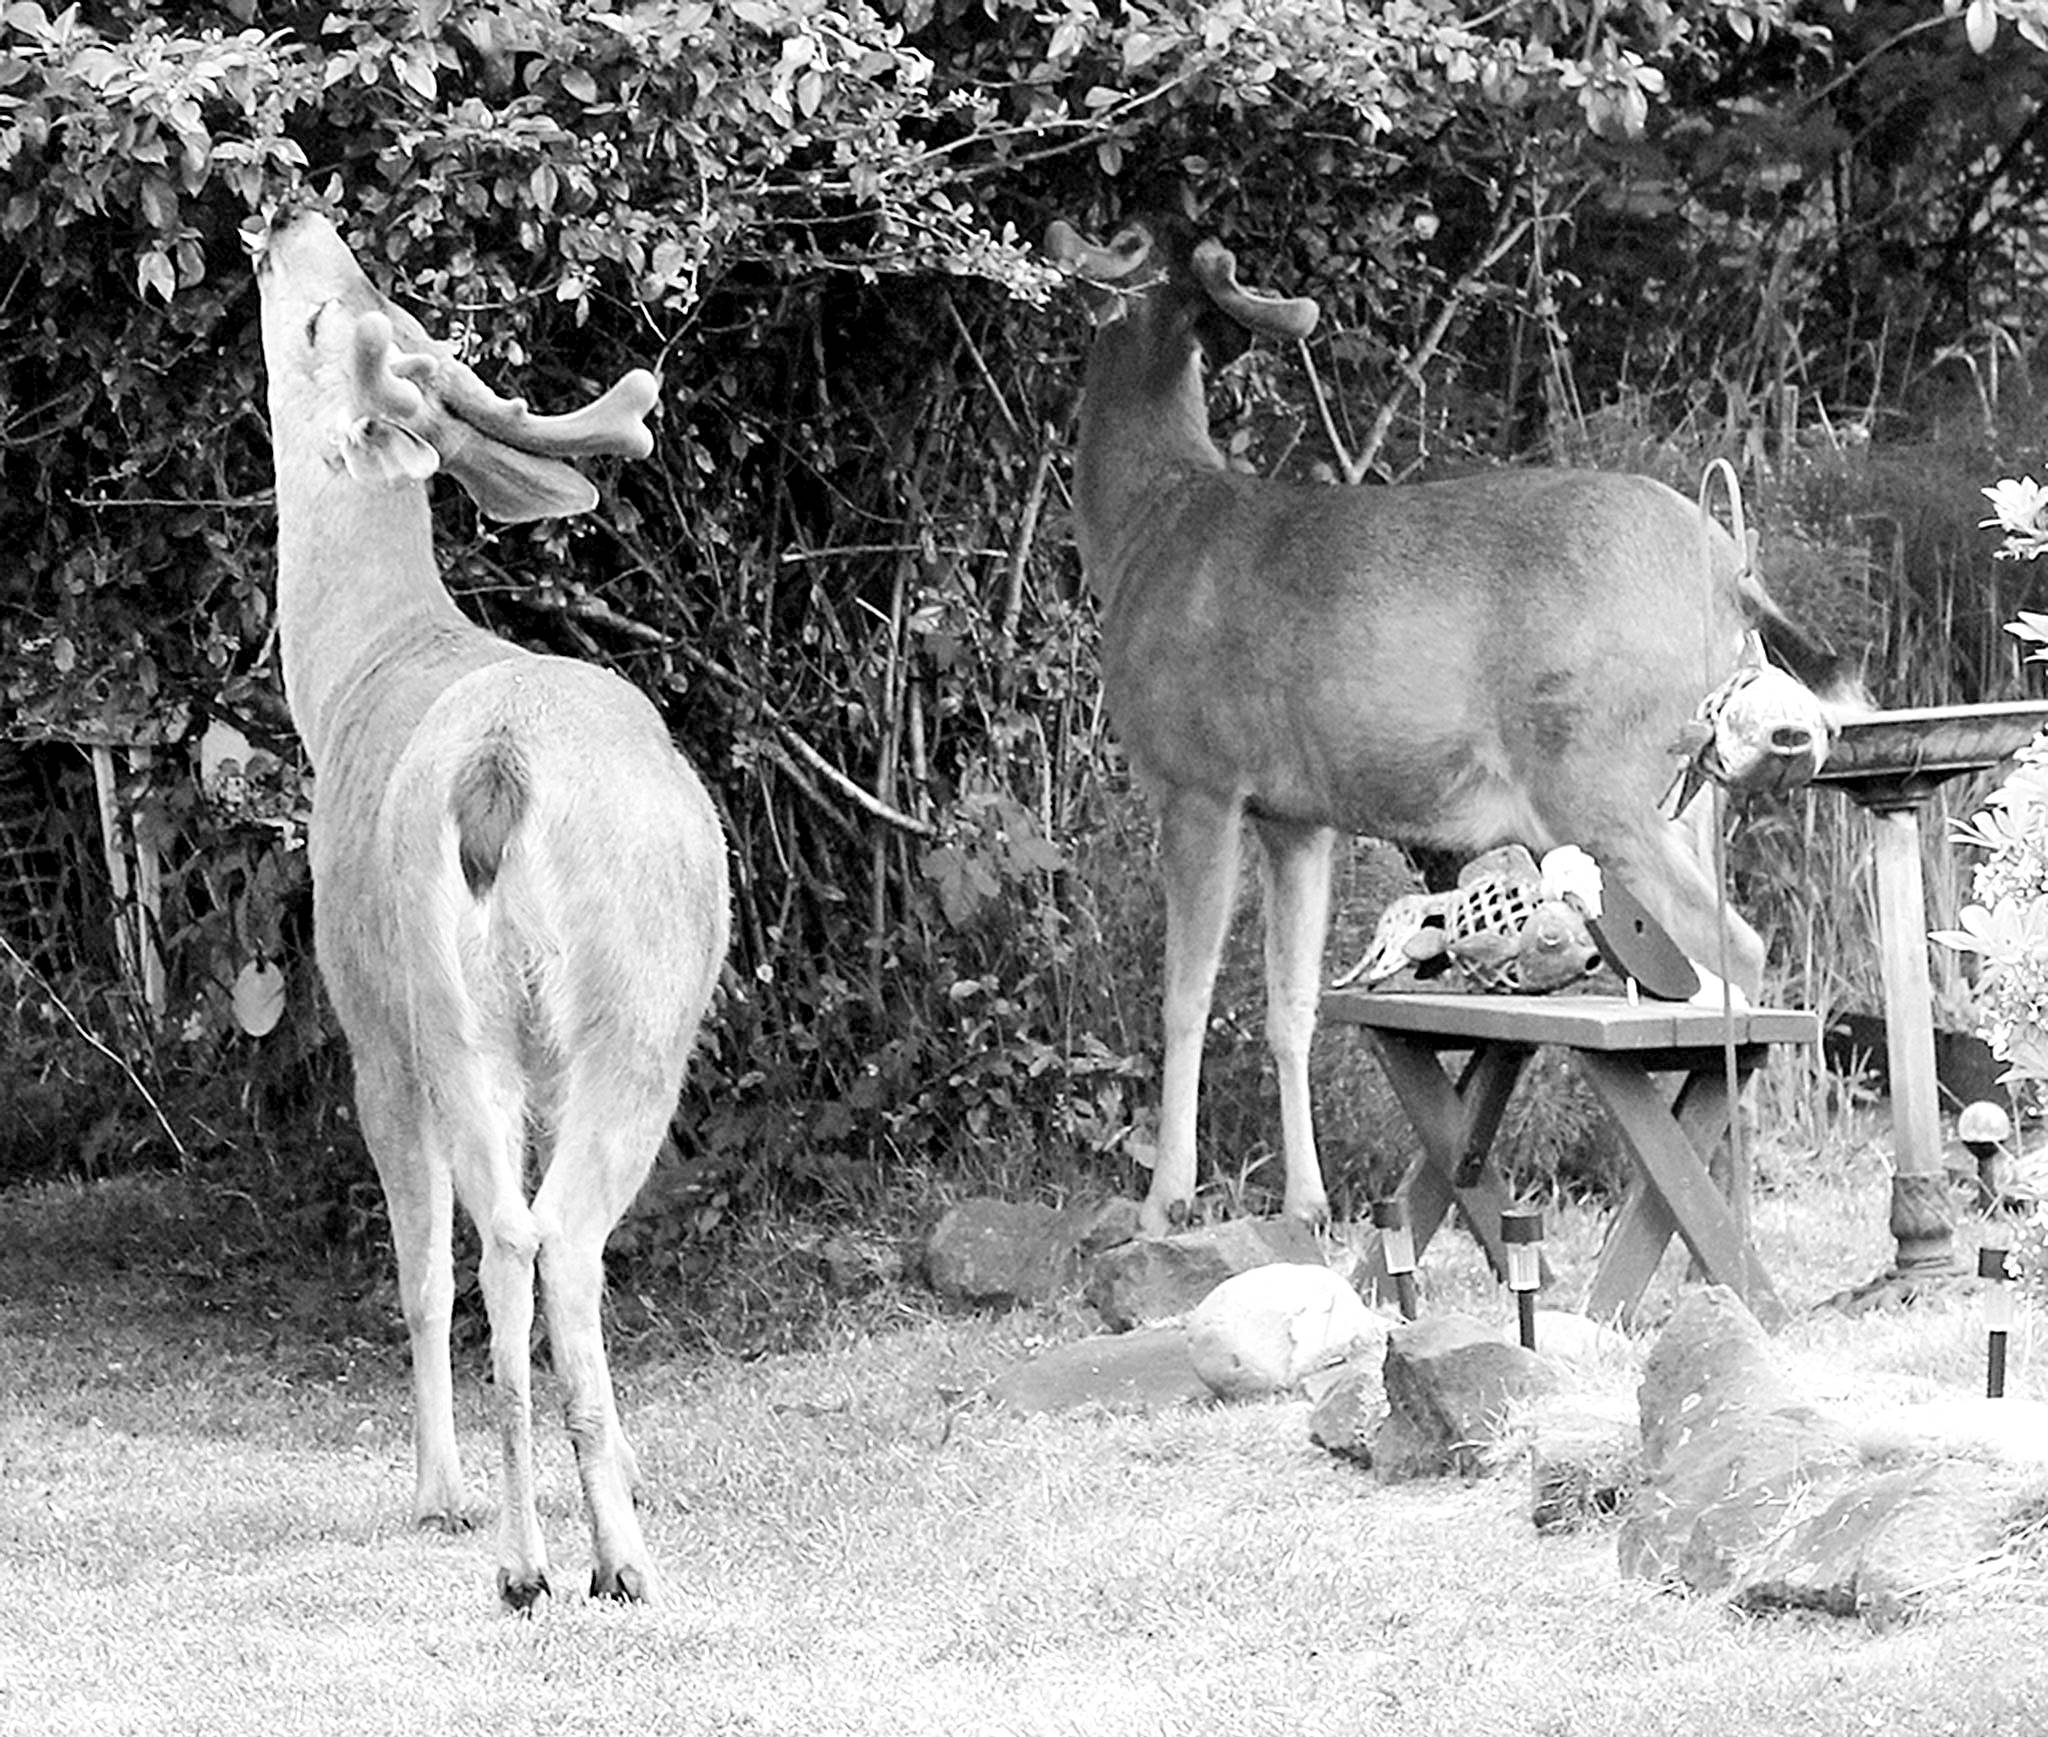 O.S. council approves ban on feeding deer, other wildlife